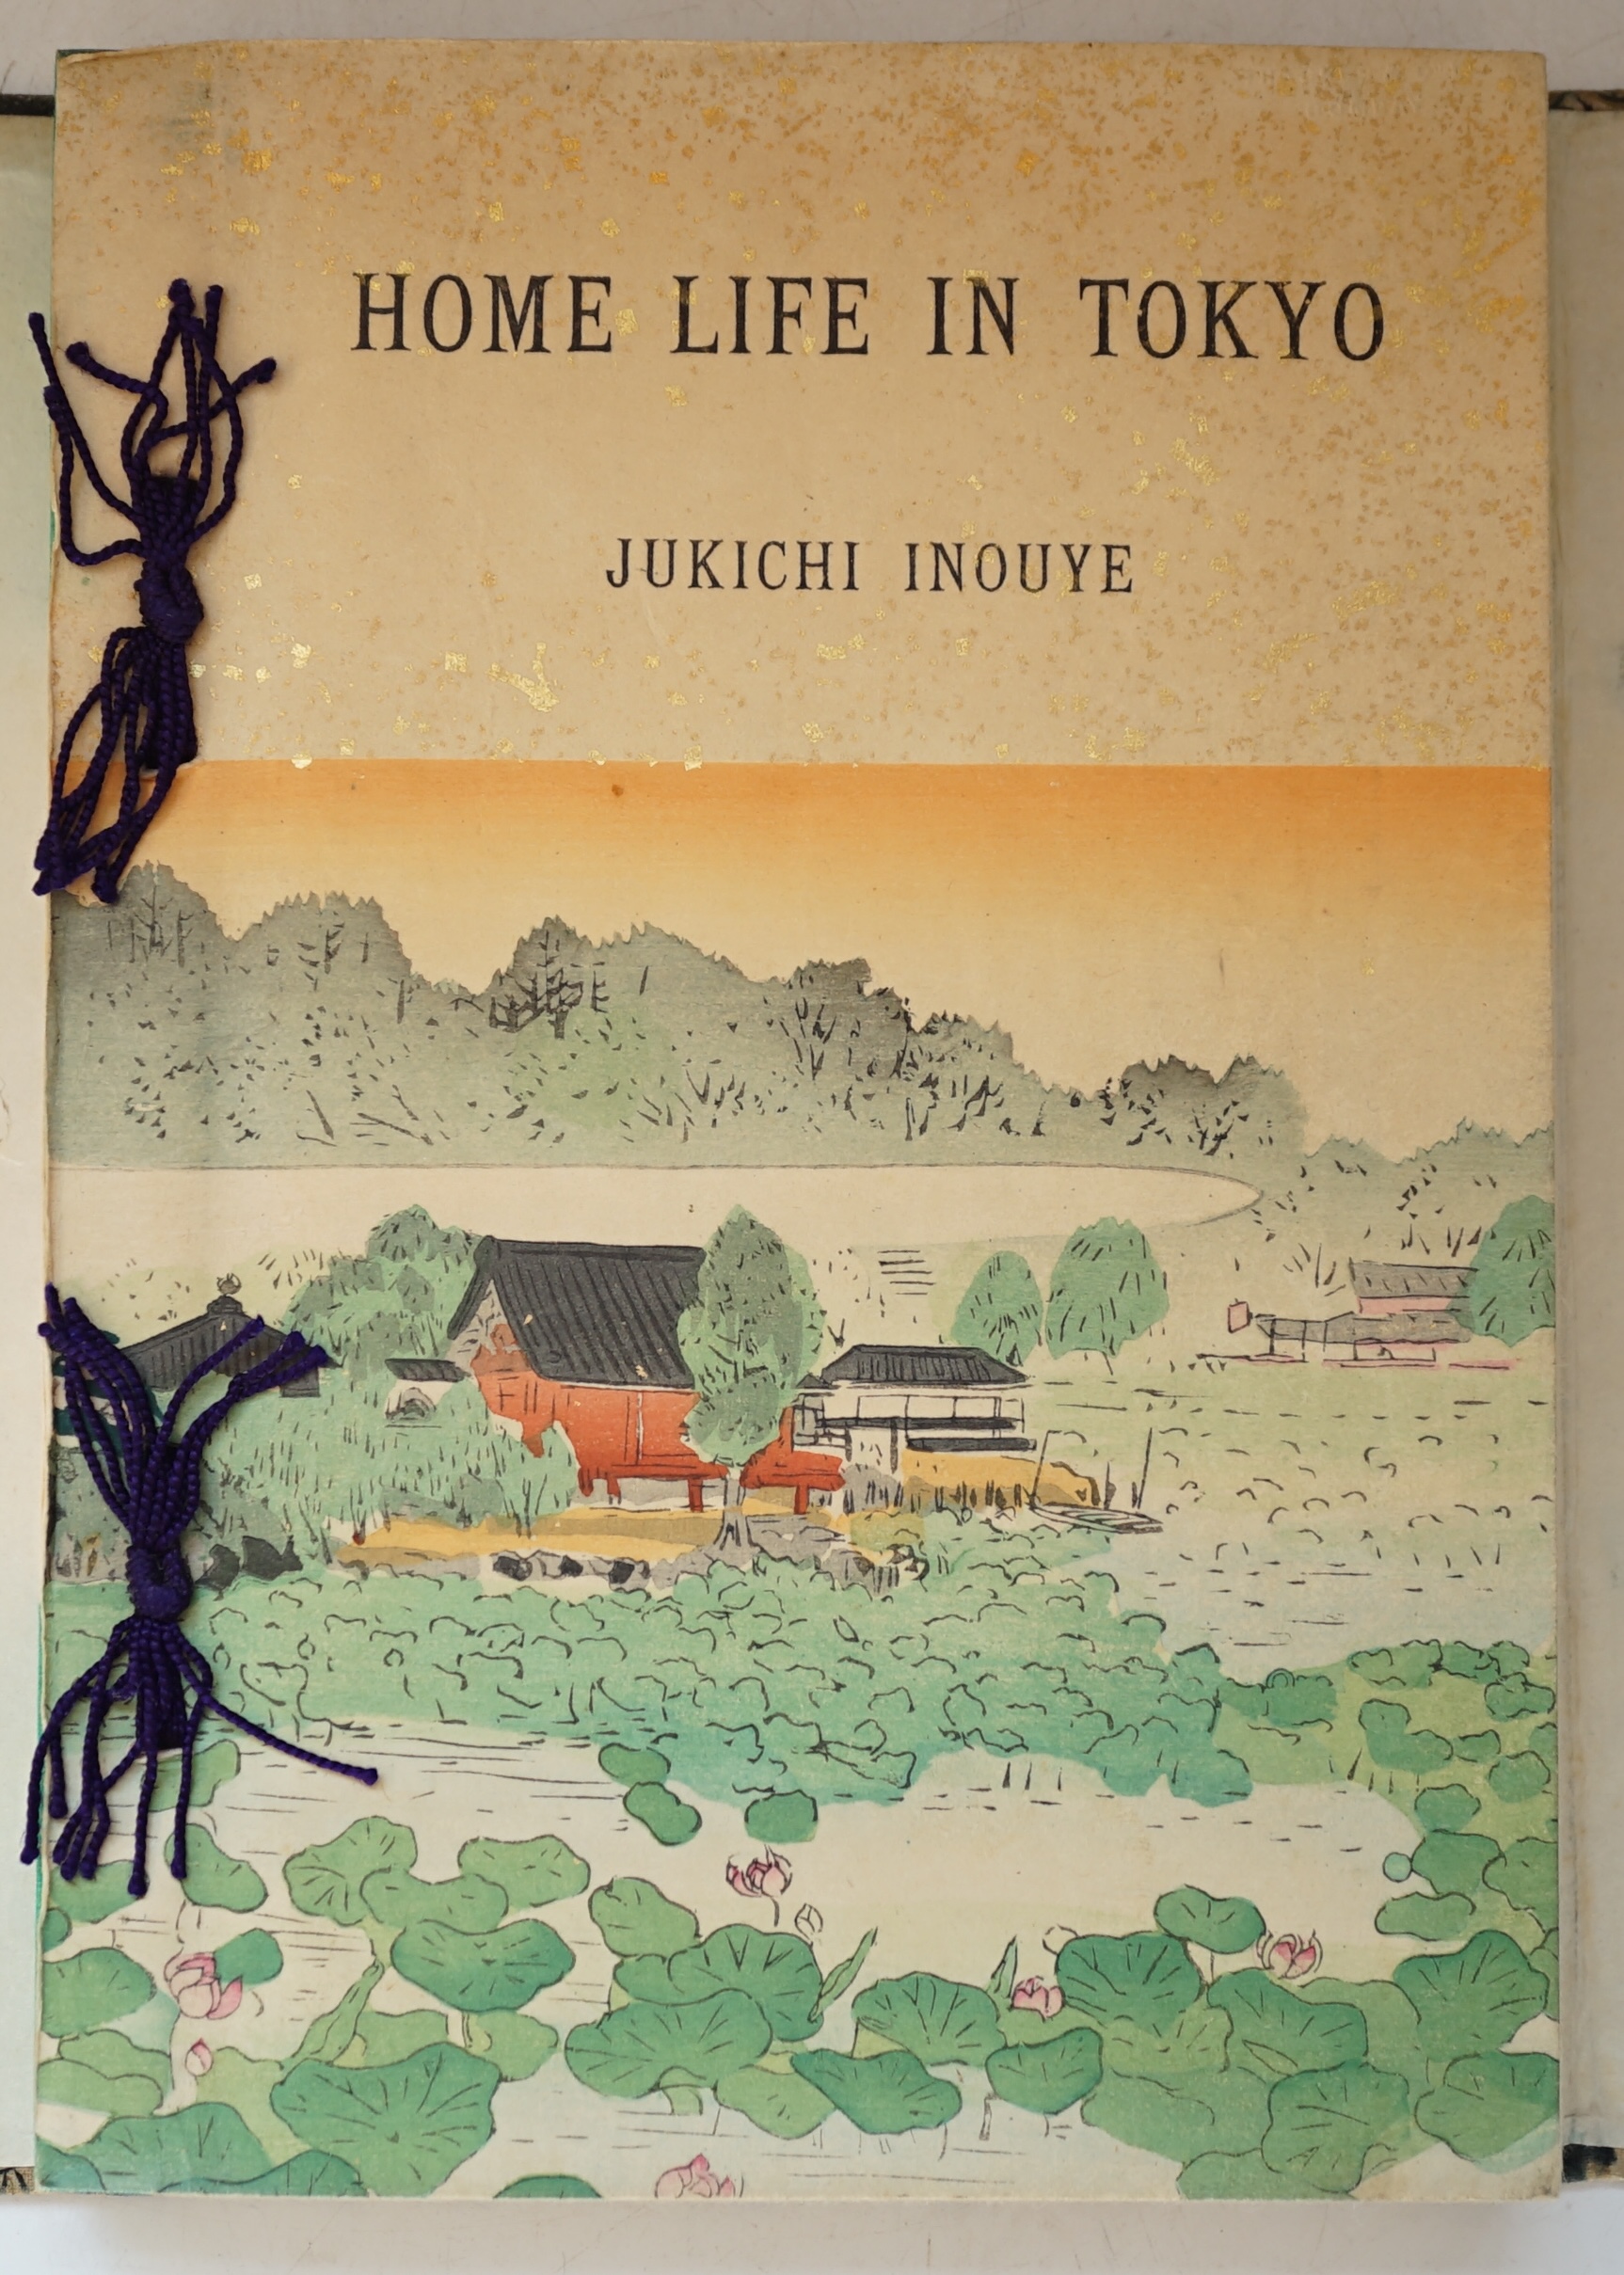 Inouye, Jukichi - Home Life in Tokyo. 1st edition, 8vo, colour woodblock frontispiece, numerous woodblock drawings. Publisher’s pictorial colour woodblock printed covers, stitched with cotton ties, front cover top right